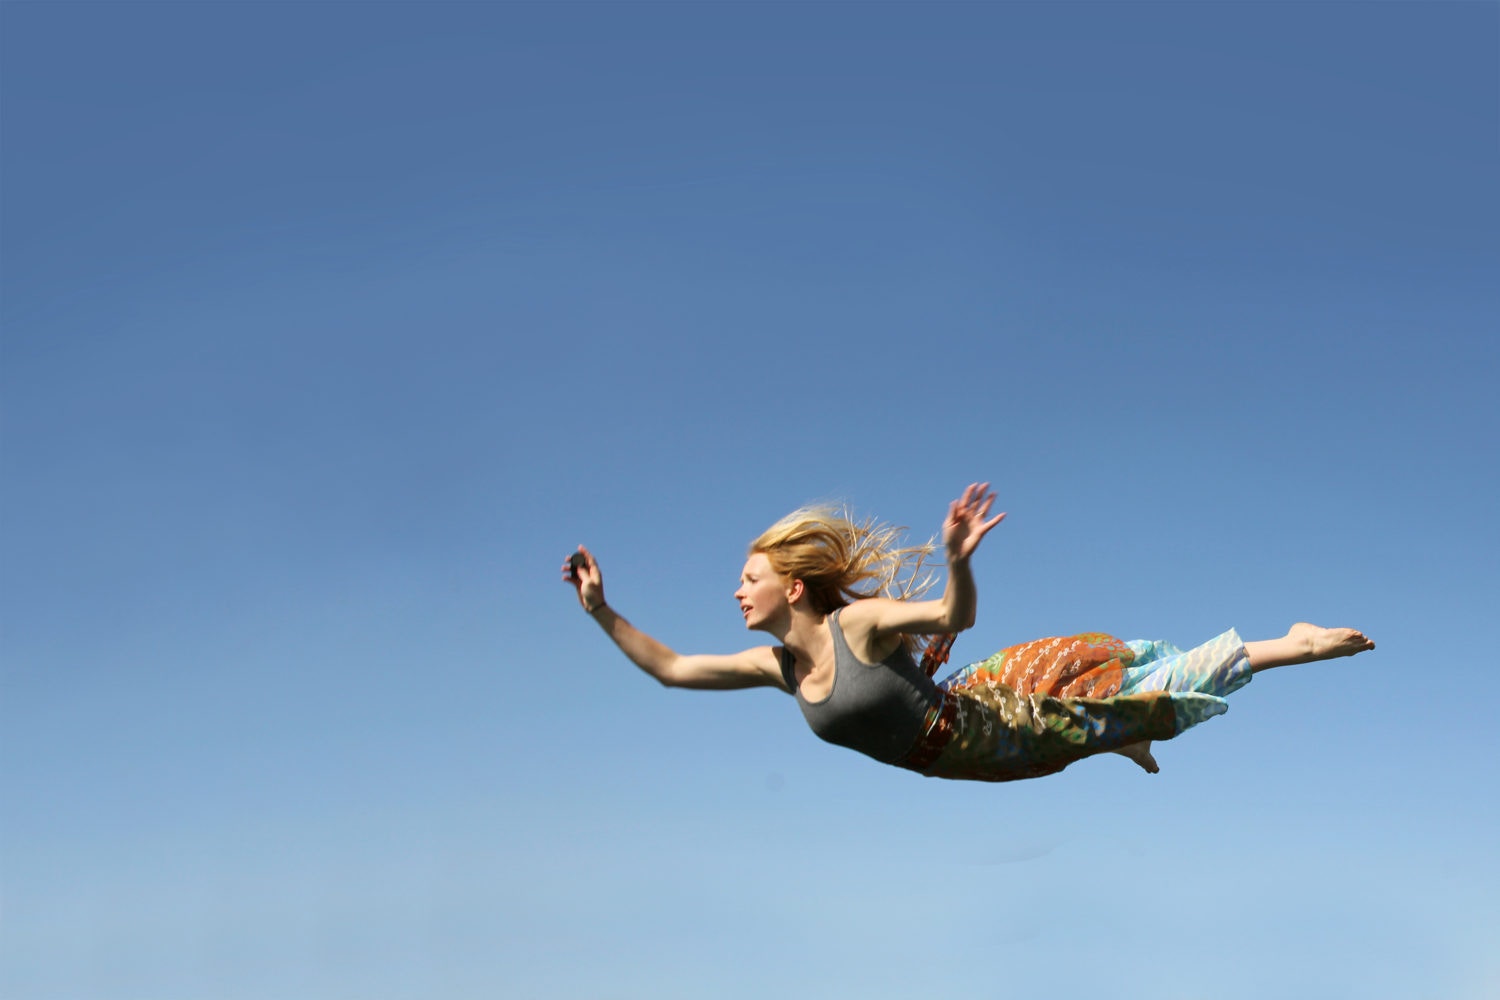 young woman with blonde hair flying or falling through the air